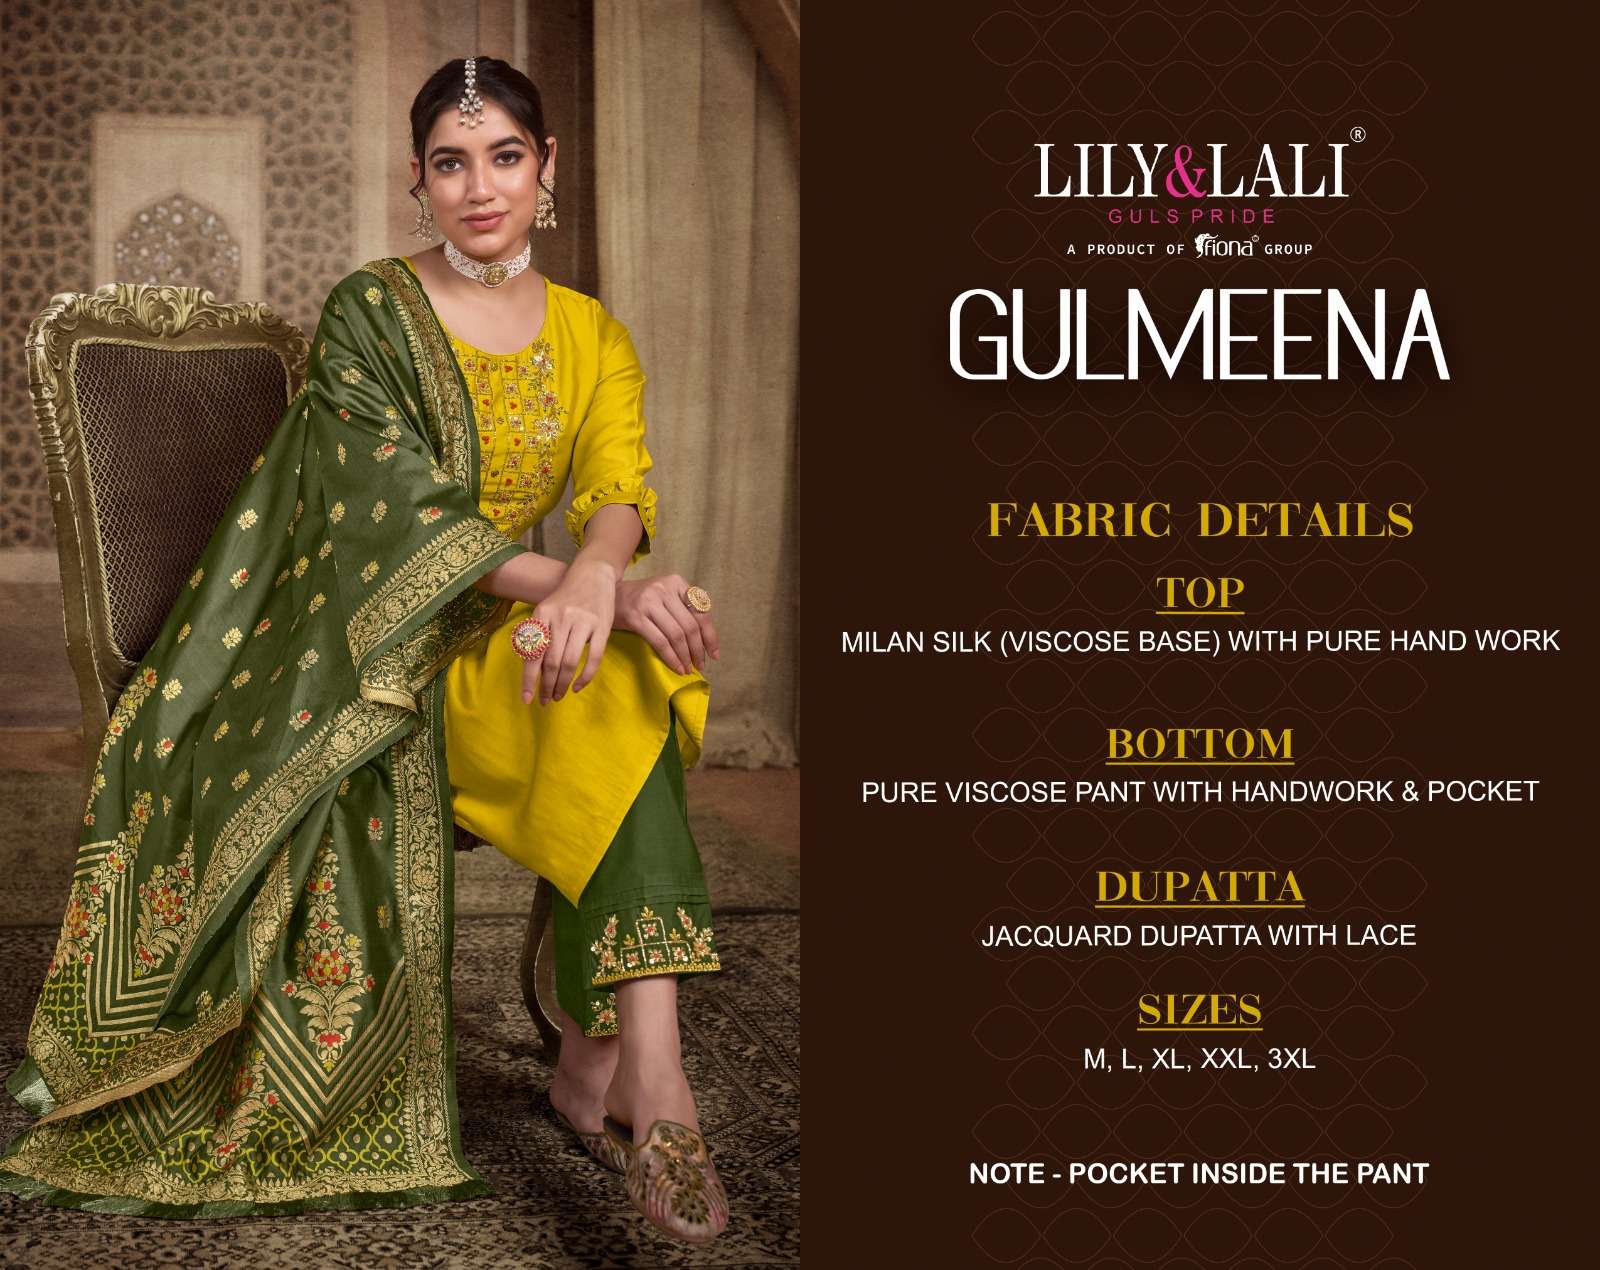 Gulmeena By Lily And Lali 11101 To 11106 Series Beautiful Stylish Suits Fancy Colorful Casual Wear & Ethnic Wear & Ready To Wear Pure Viscose Silk Printed Dresses At Wholesale Price